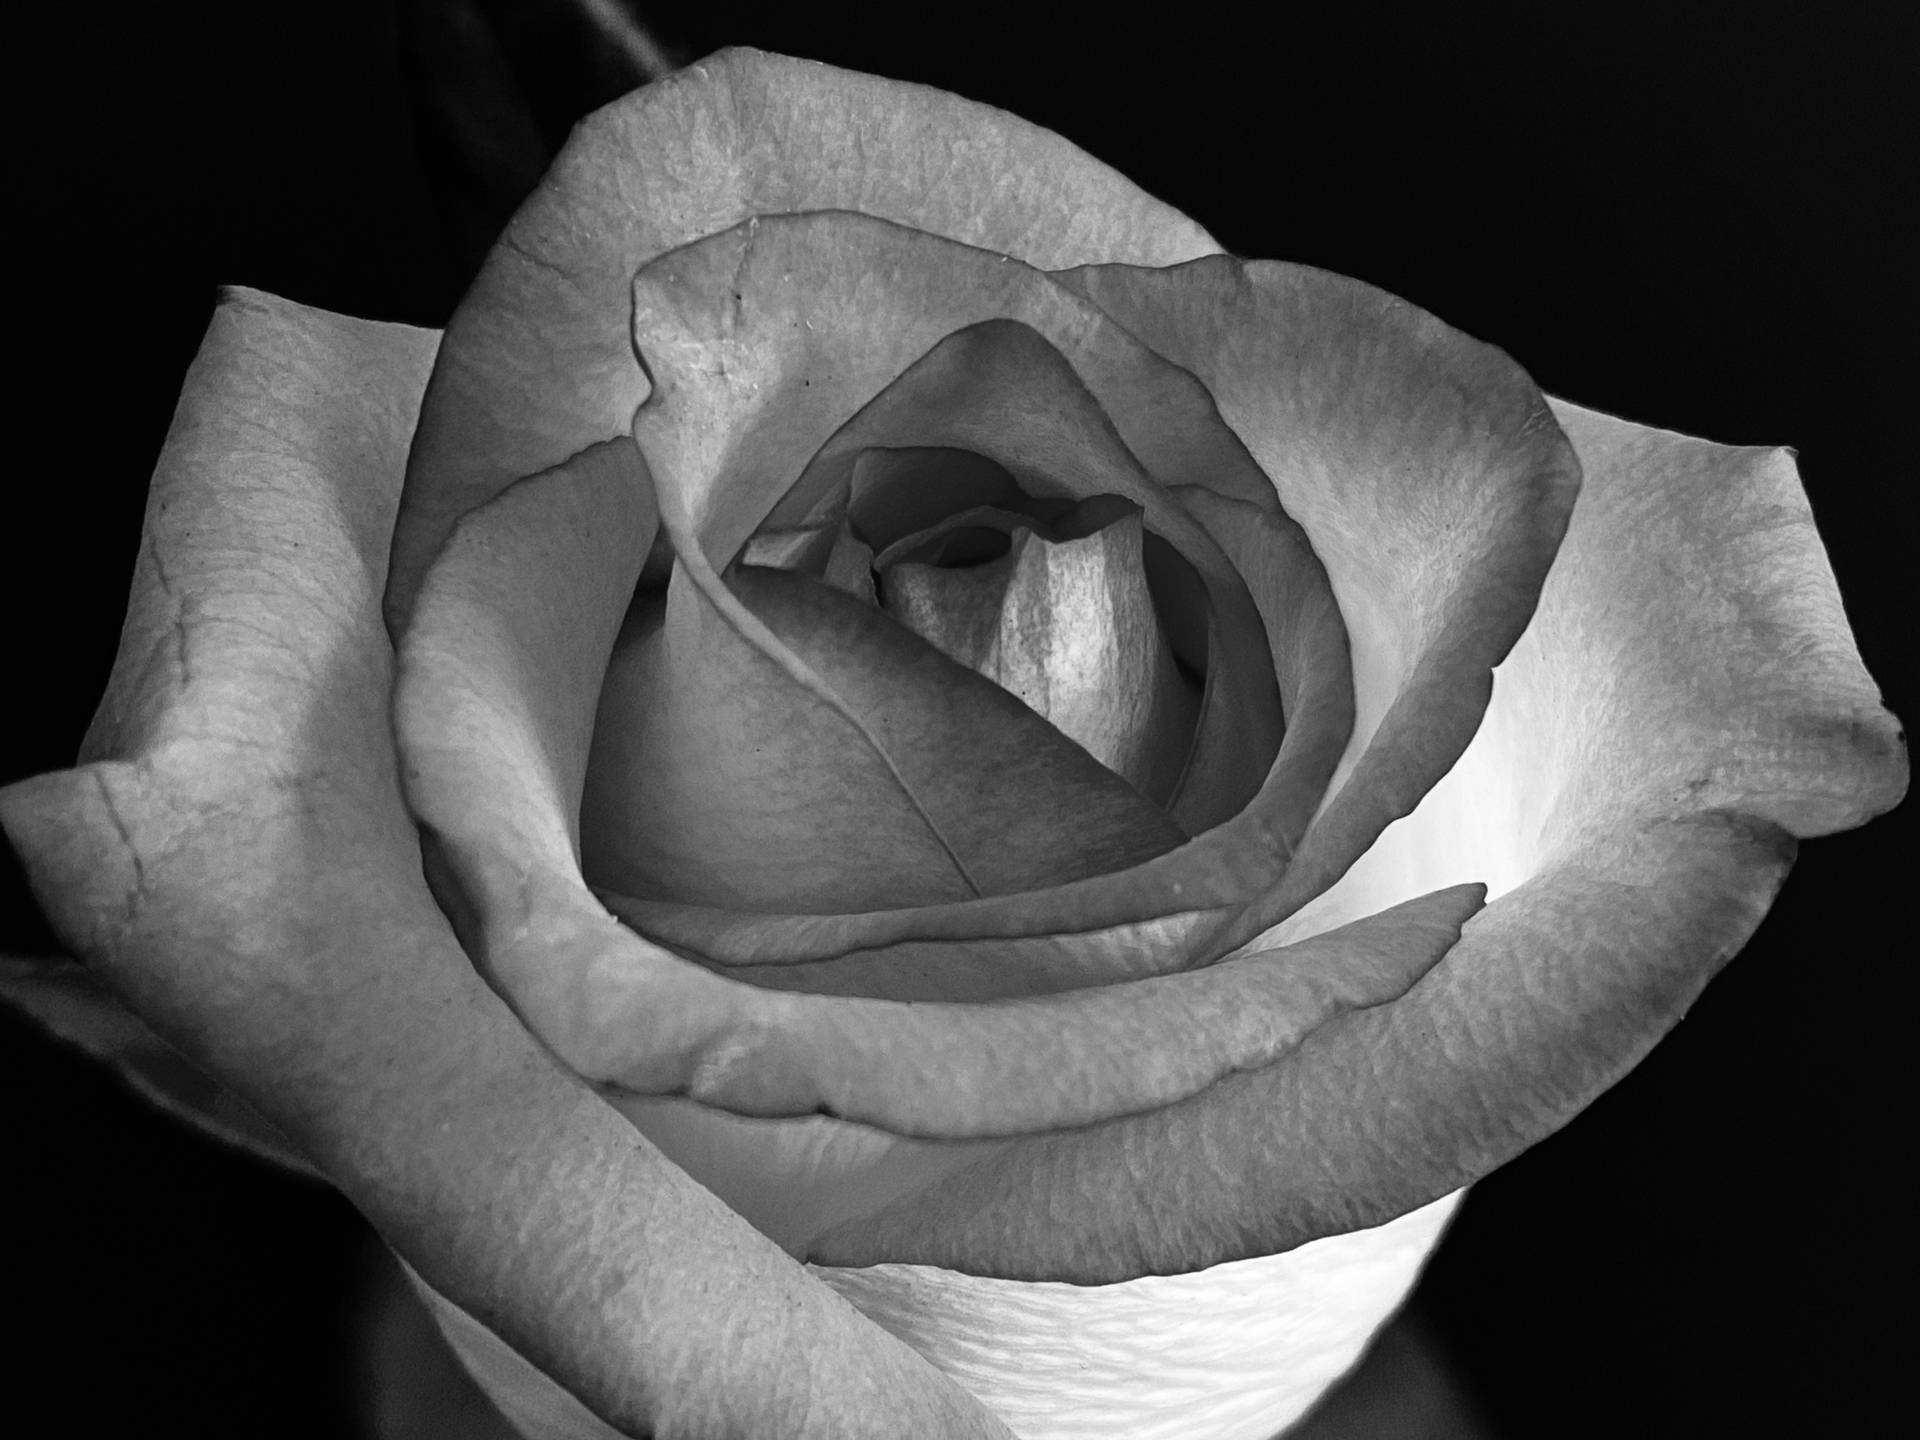 Grayscale Rose Iphone Wallpaper